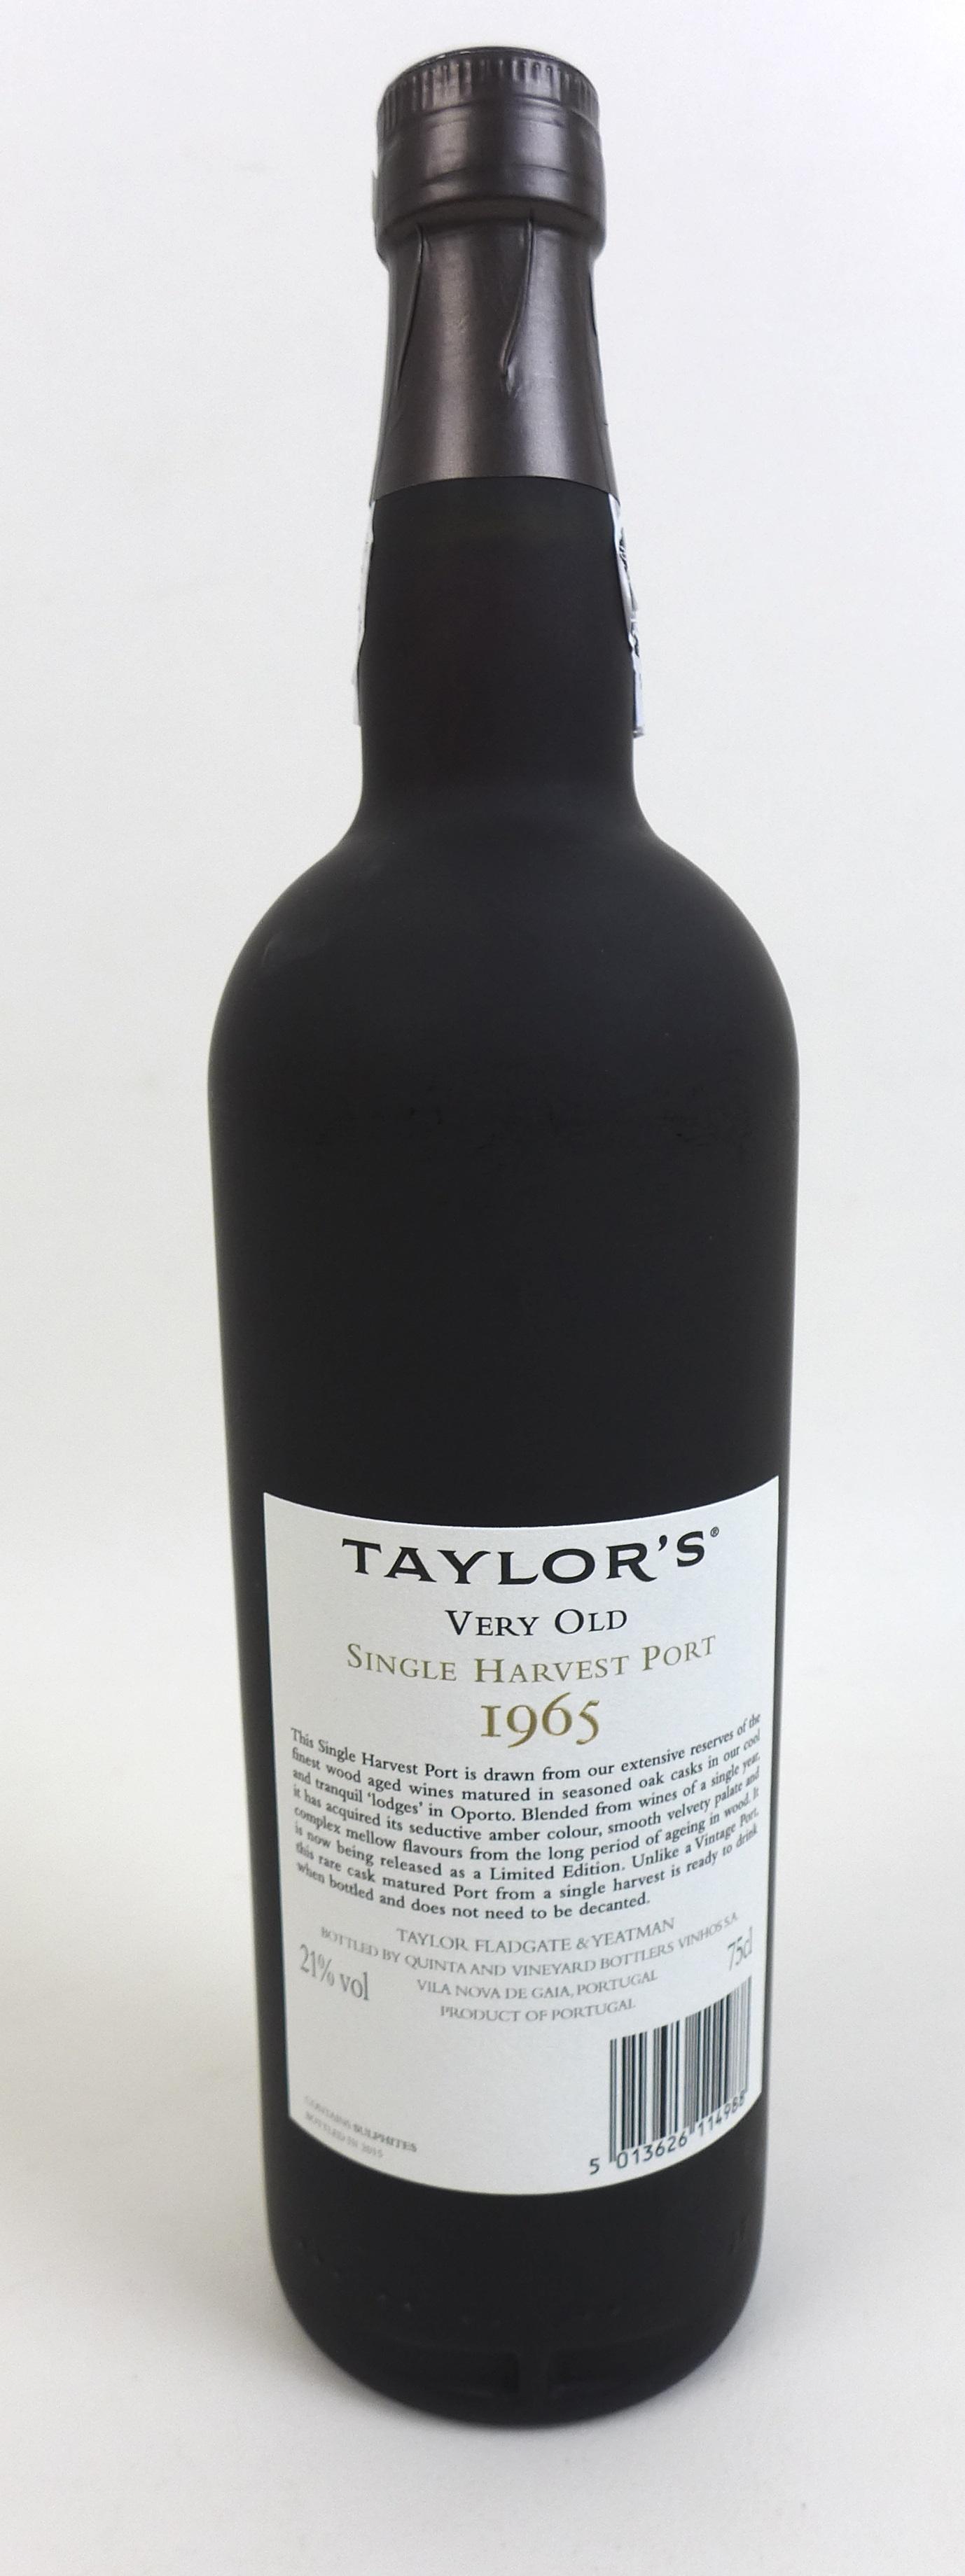 A limited edition bottle of Taylor's 'Very Old Single Harvest 1965' port, with wooden presentation - Image 3 of 5